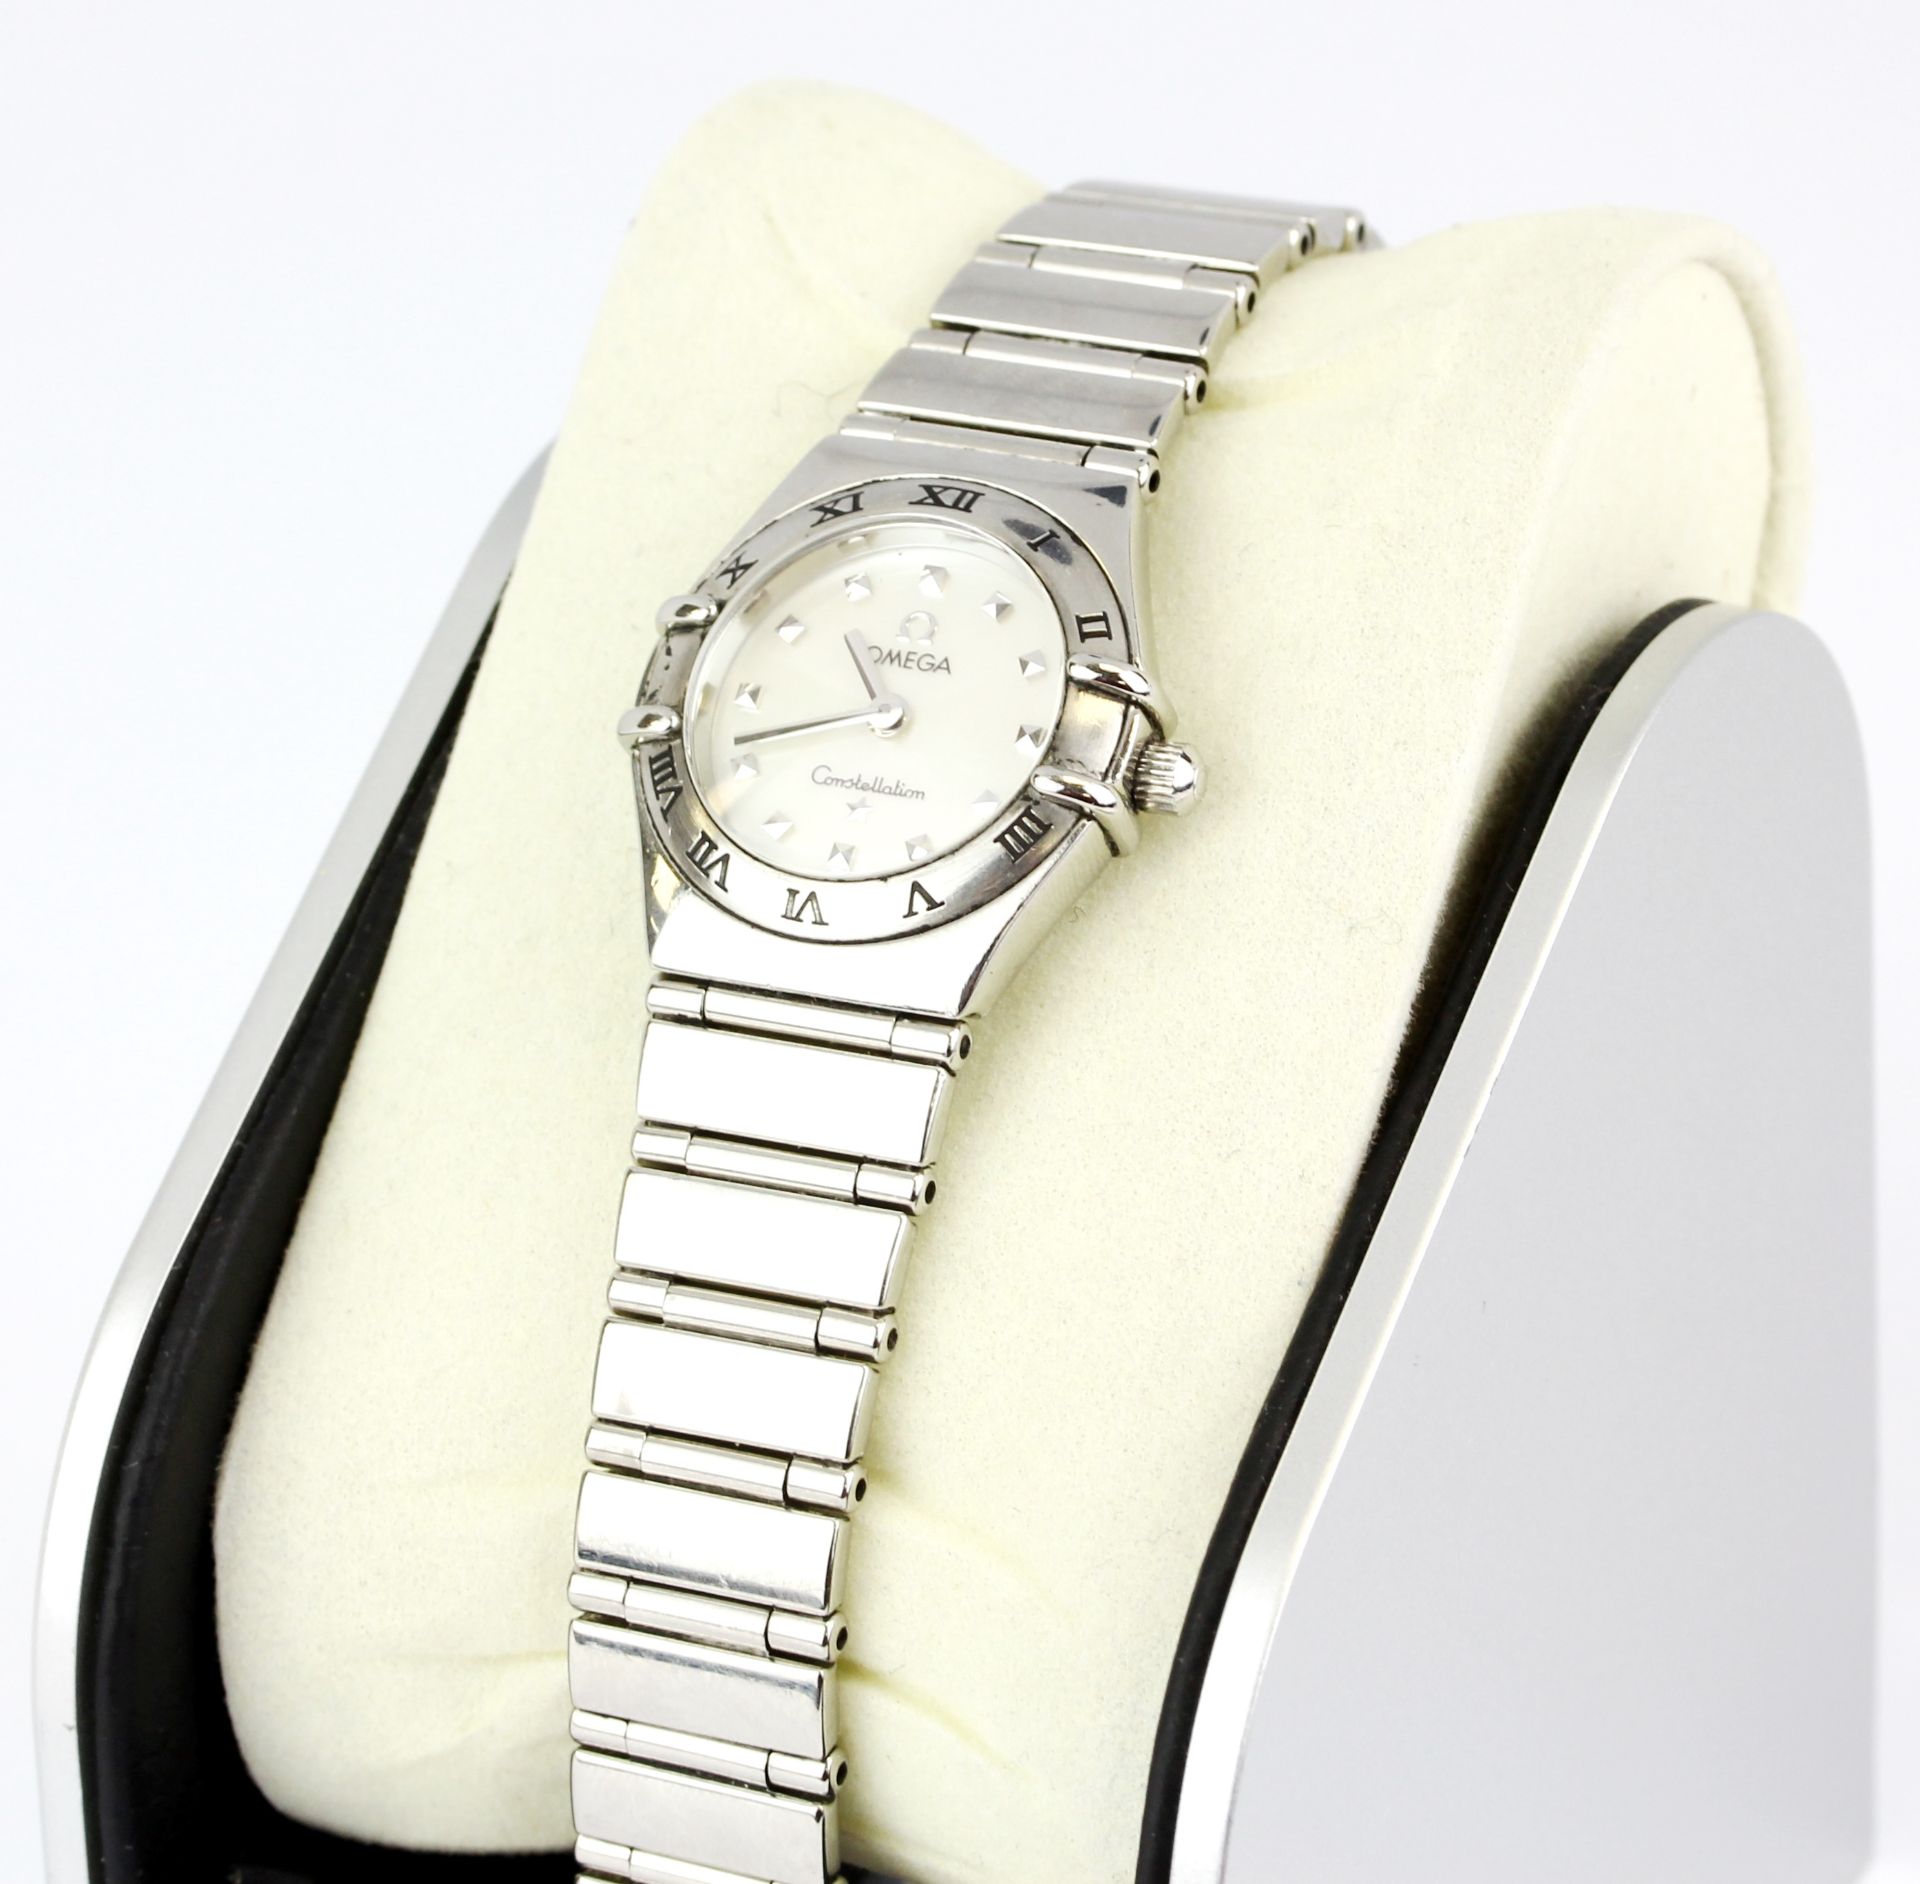 An Omega 656/875 'my choice' Constellation wristwatch (no. 56438759) with a mother of pearl face. - Image 5 of 5